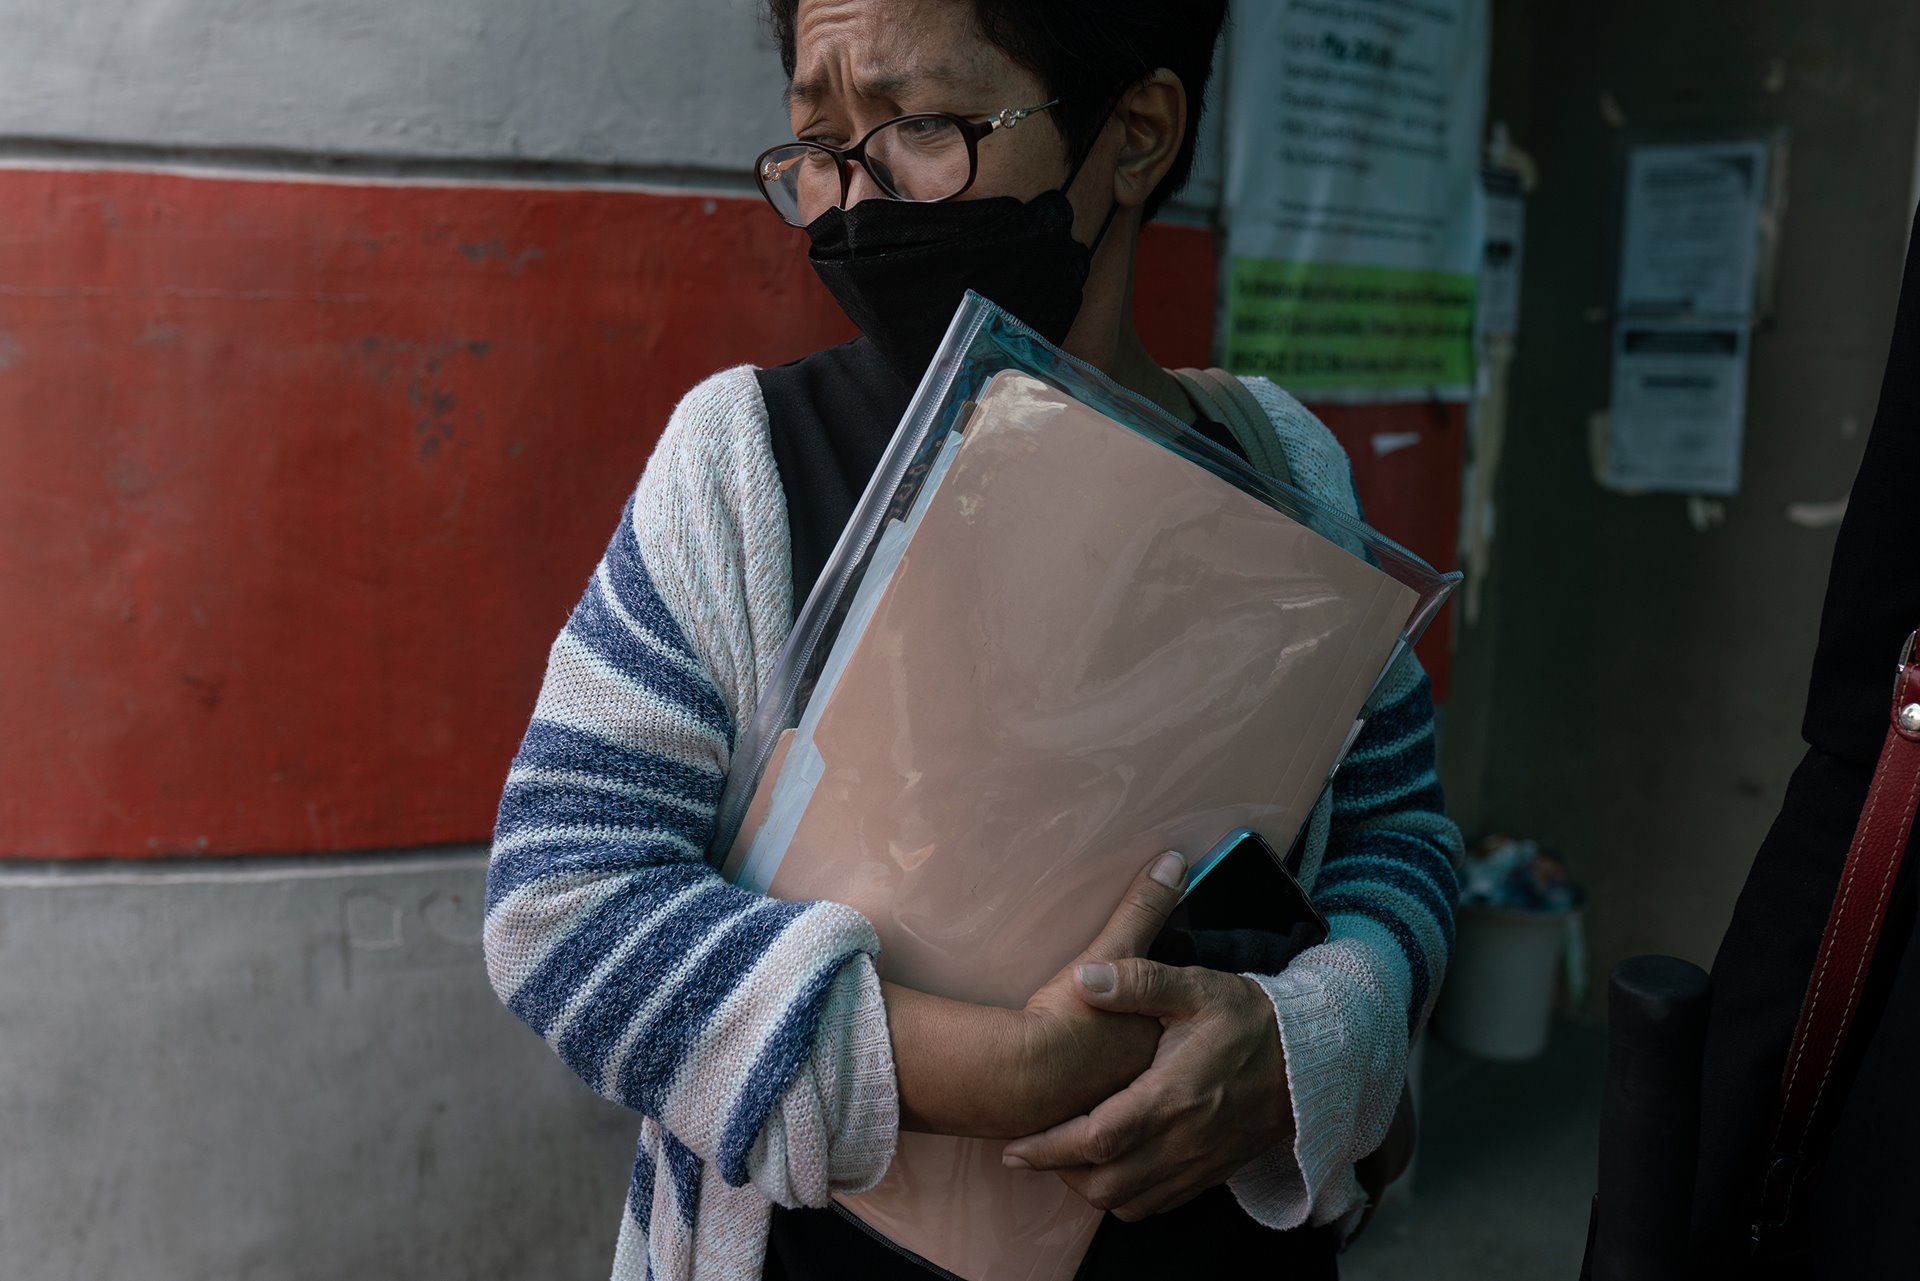 <p>Mary Anne Domingo stands outside a courthouse after giving testimony, in Caloocan, the Philippines. She brought a case against the police after her husband and son were killed in a raid in 2016. The trial commenced in 2021.</p>
